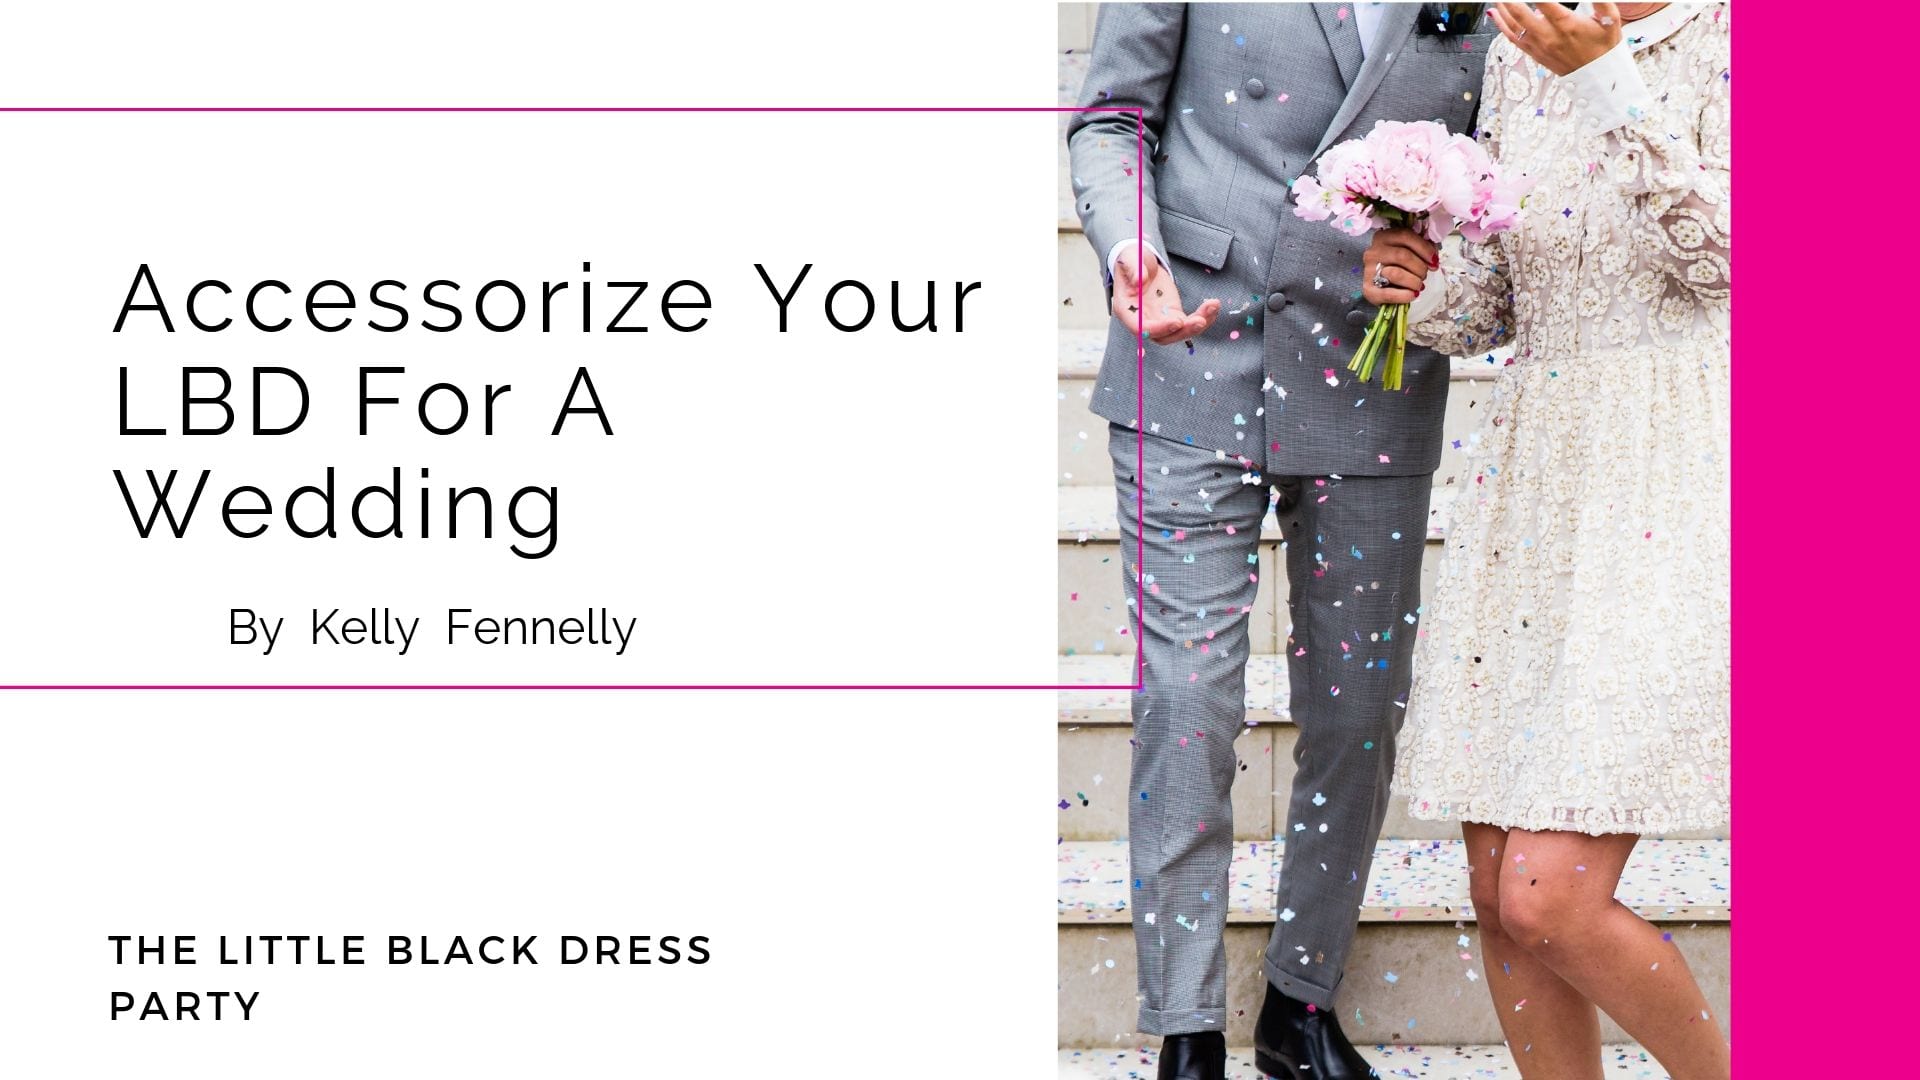 Accessorize Your LBD For A Wedding!